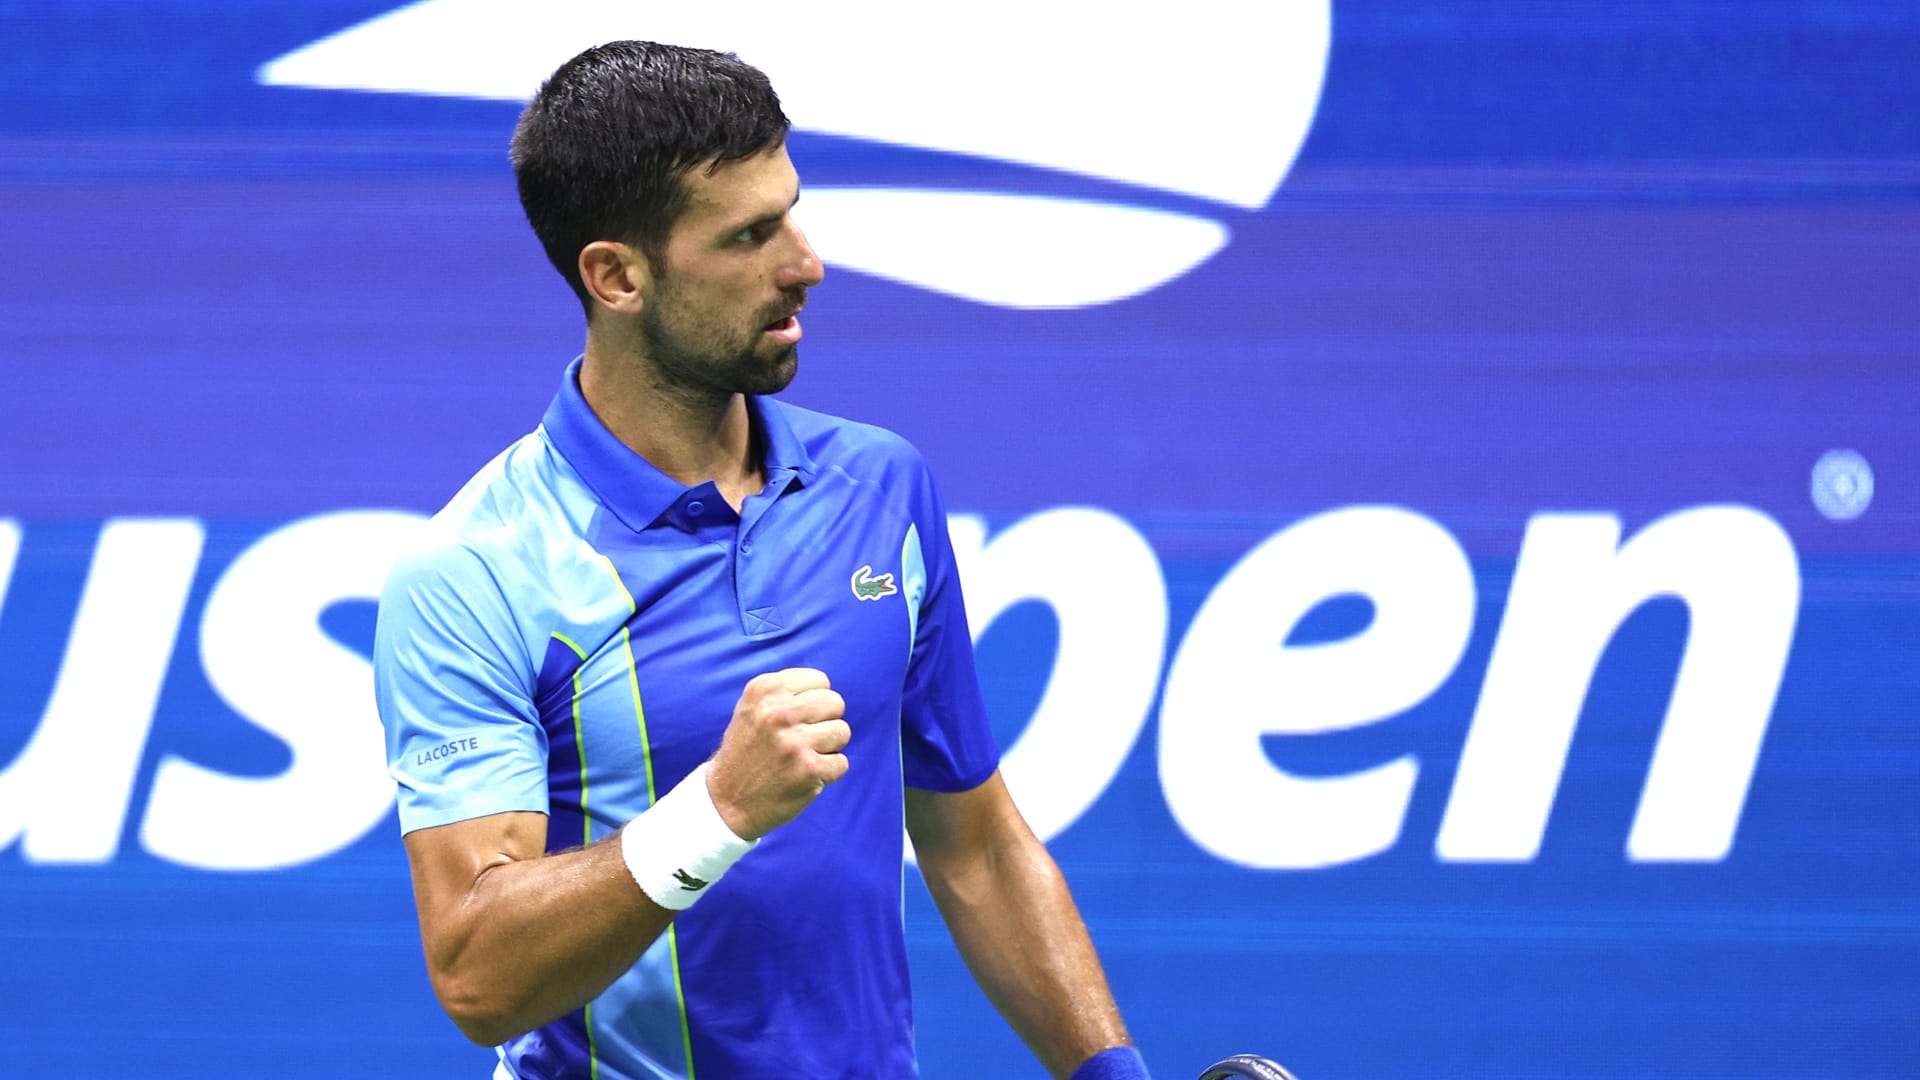 Stat of the Day Novak Djokovic has now won 85 or more matches at all four Grand Slams